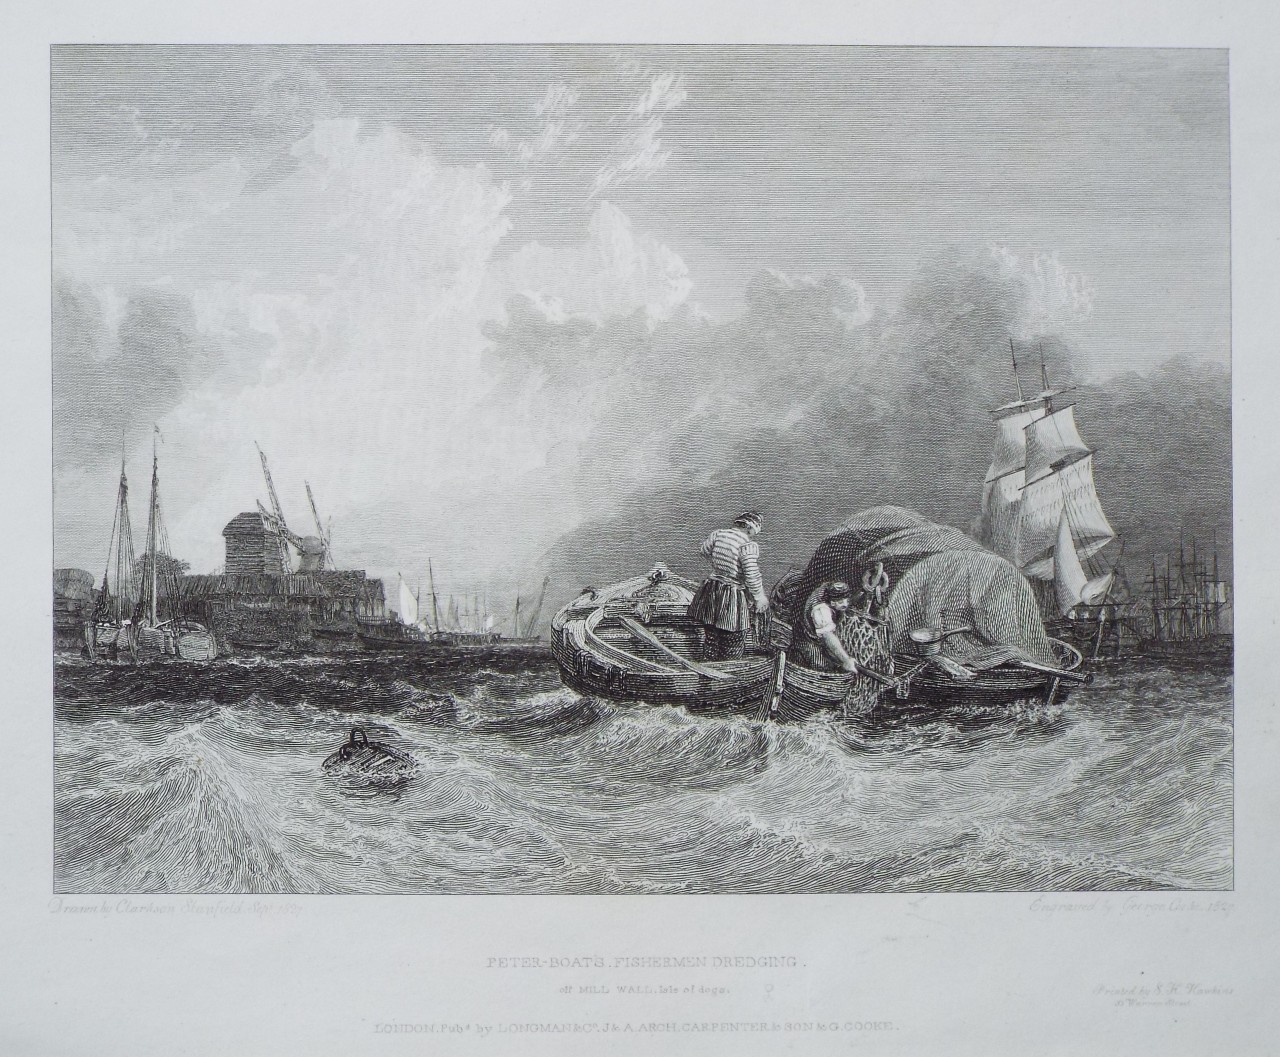 Print - Peter-Boats Fishermen Dredging off Mill Wall Isle of Dogs - Cooke